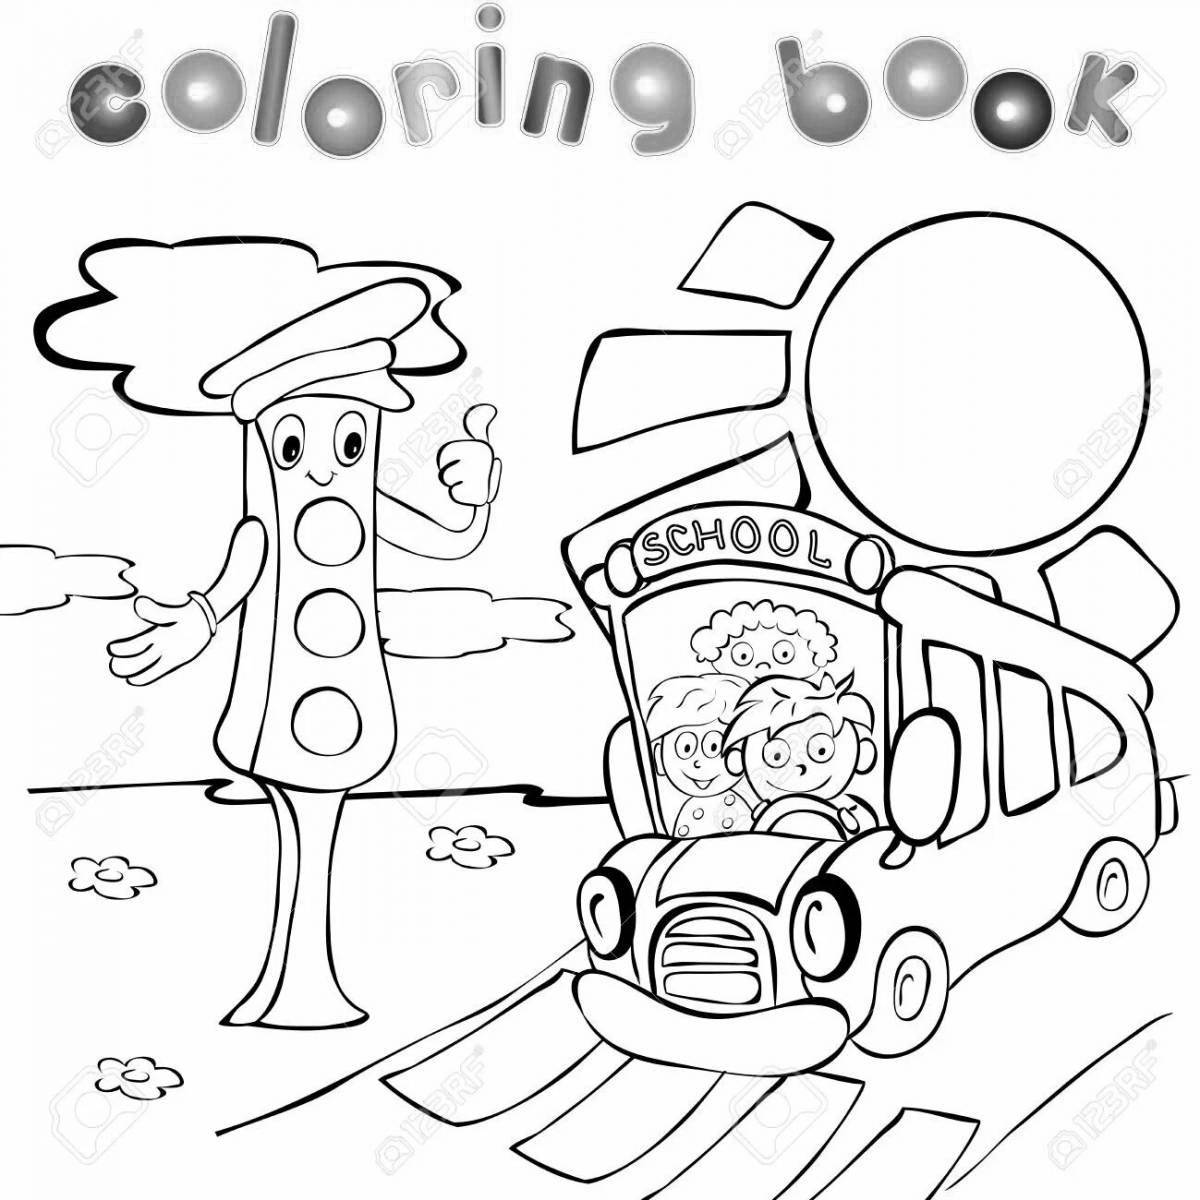 Creative rules of the road coloring book for preschoolers